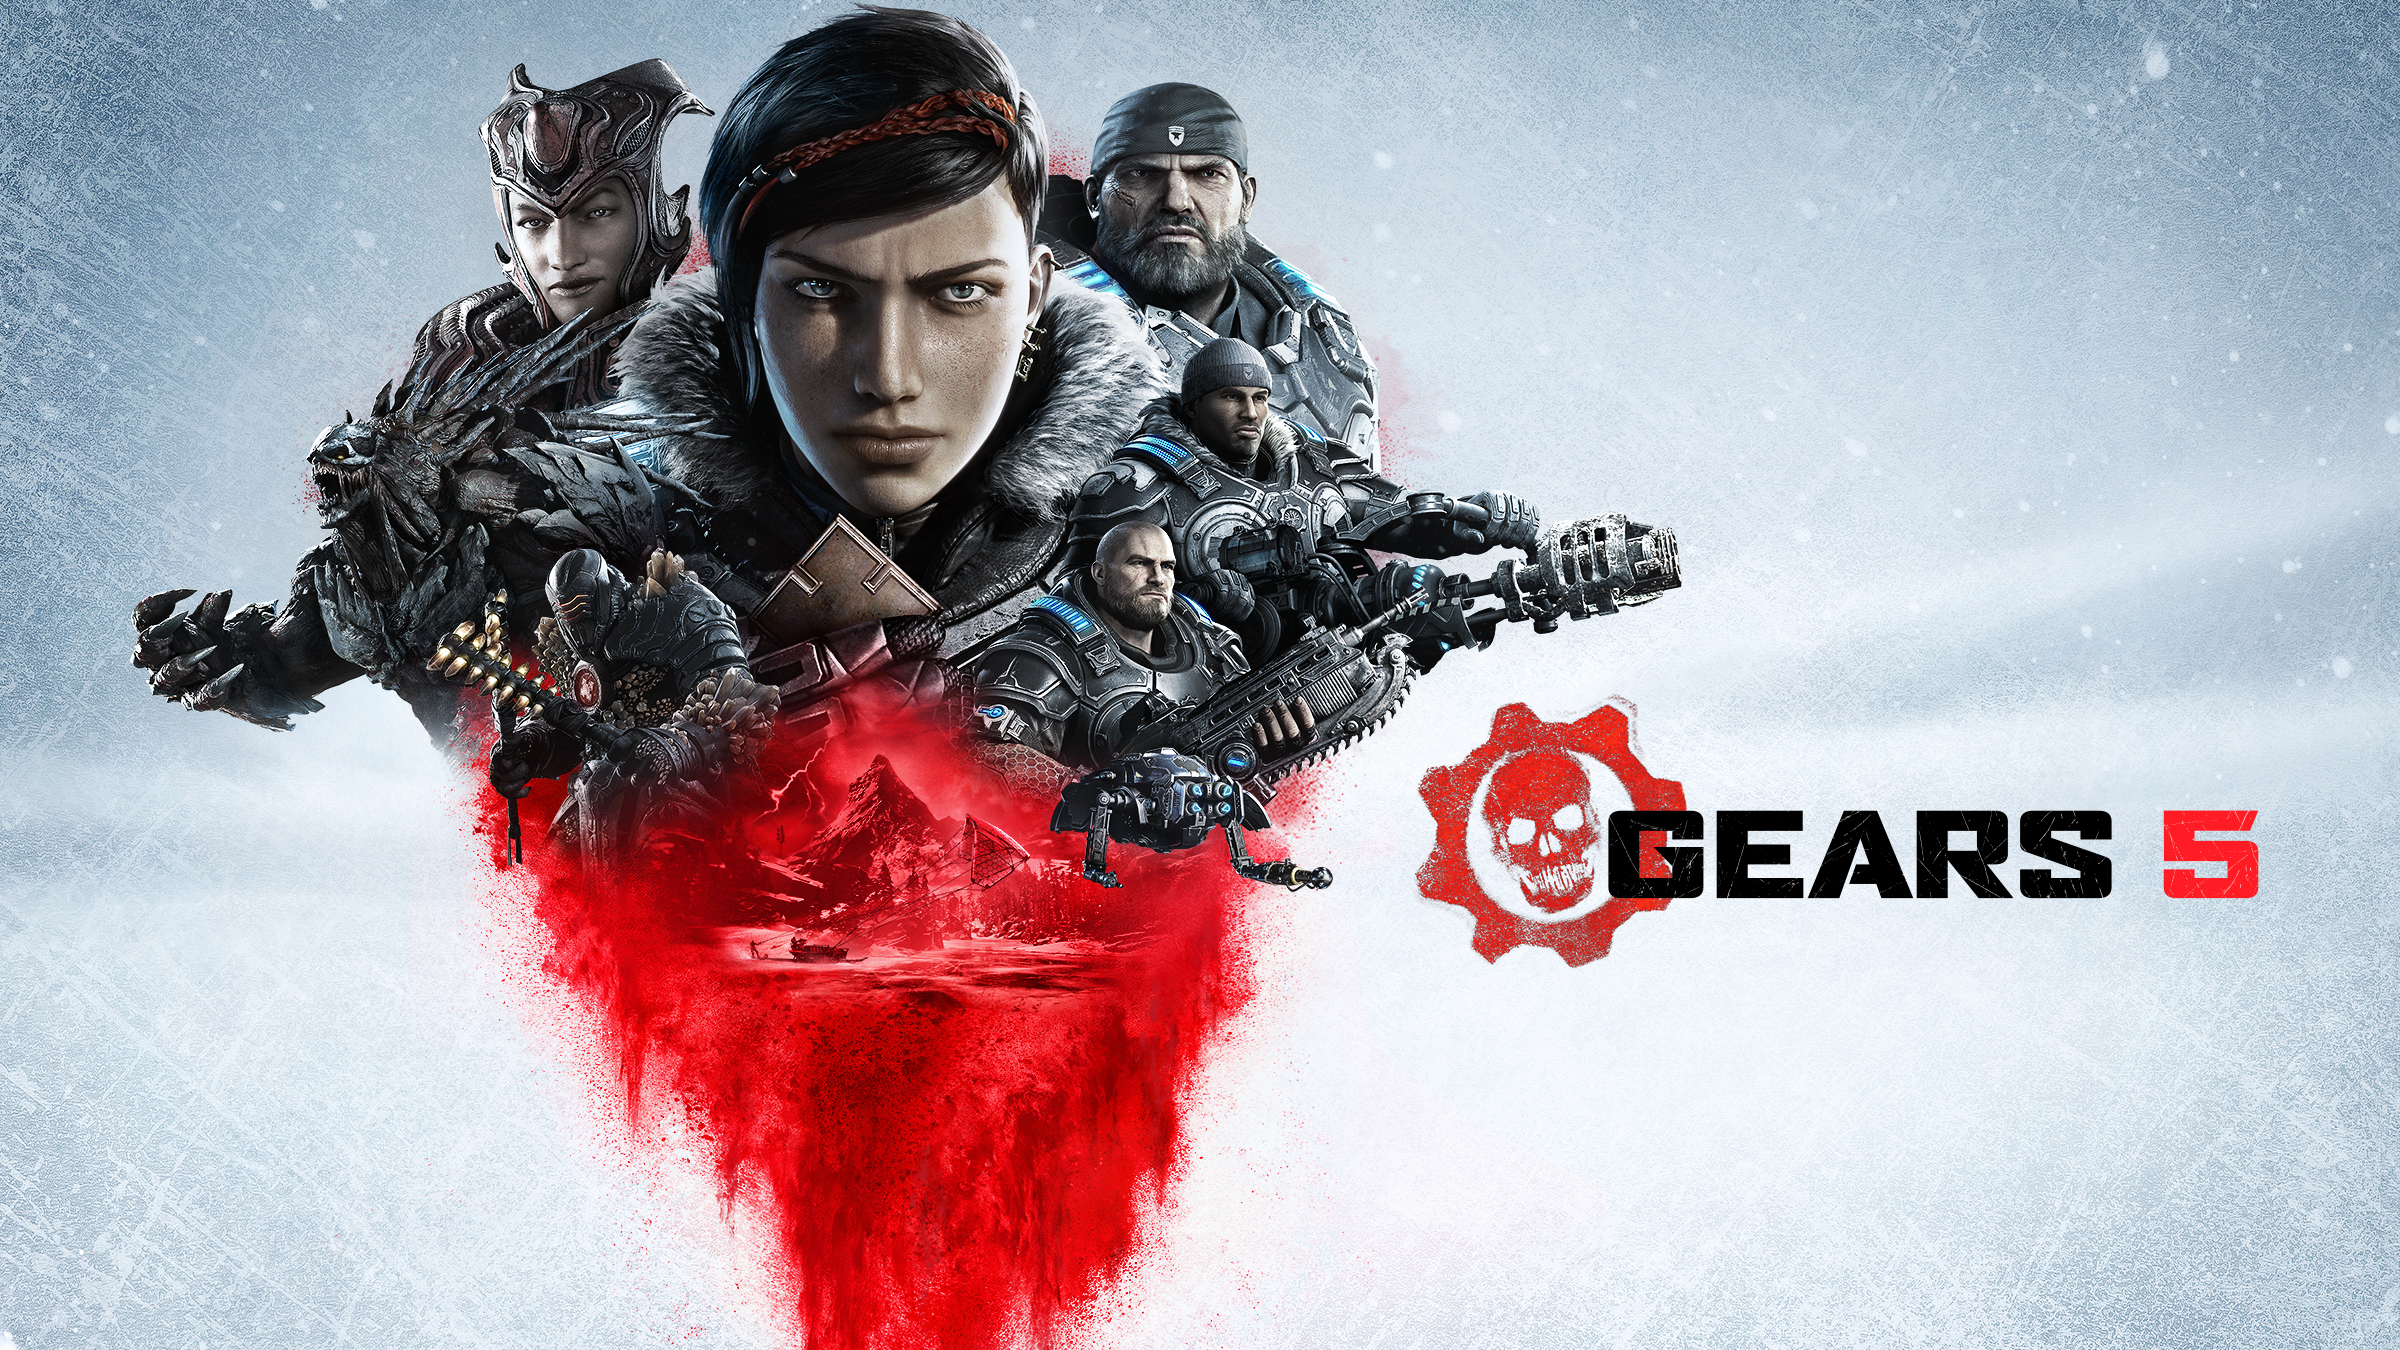 Gears 5 system requirements, PC-specific enhancements and AMD